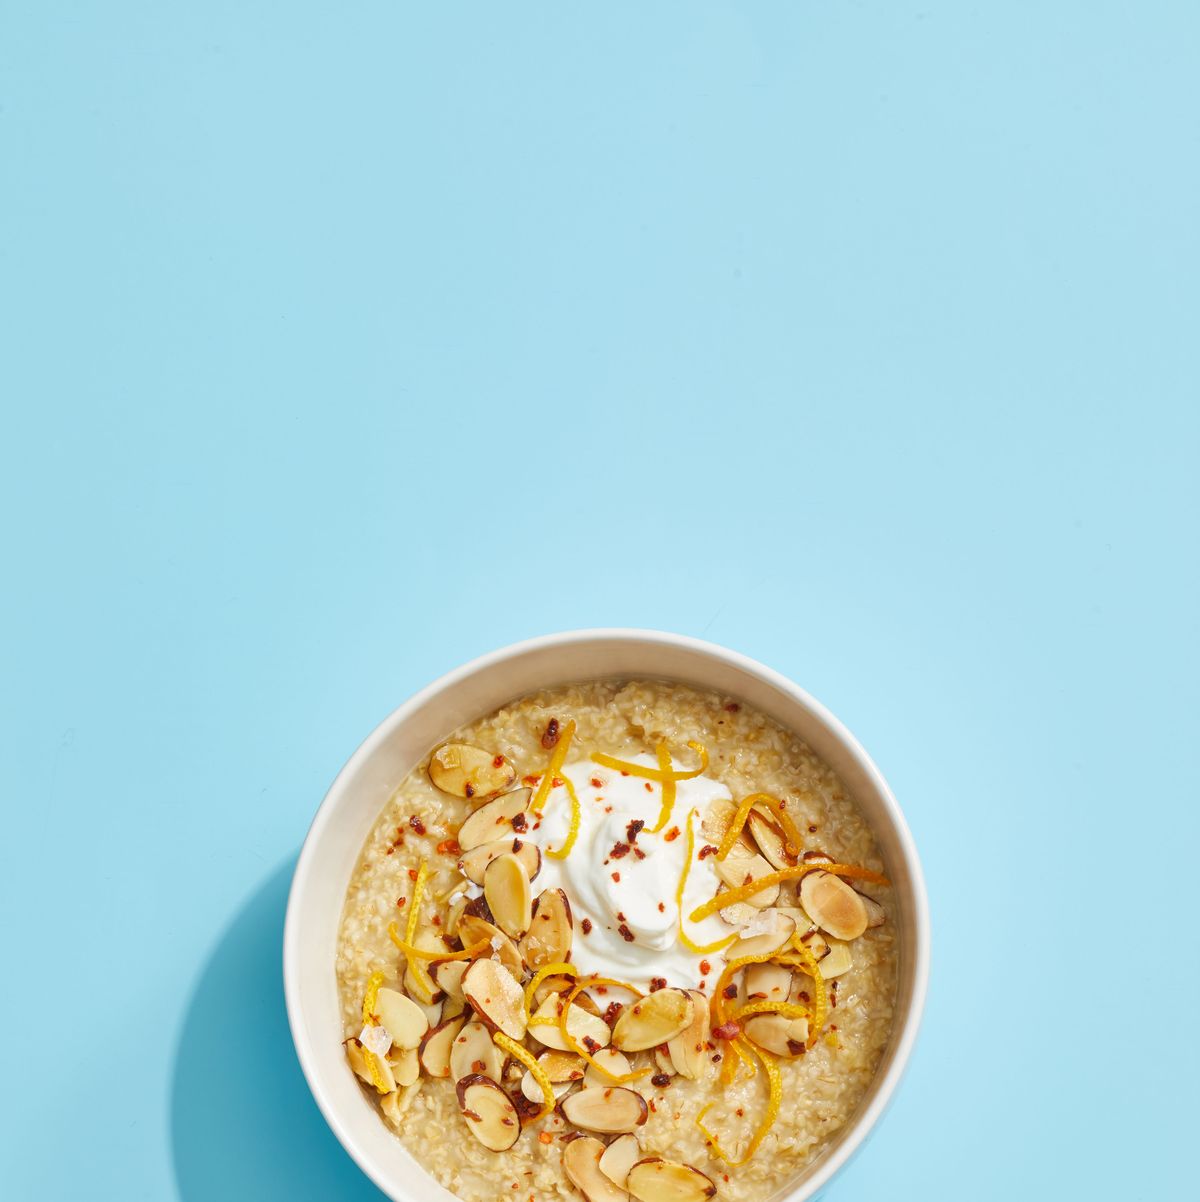 Best Oatmeal with Yogurt and Toasted Almonds Recipe - How To Make Oatmeal  with Yogurt and Toasted Almonds